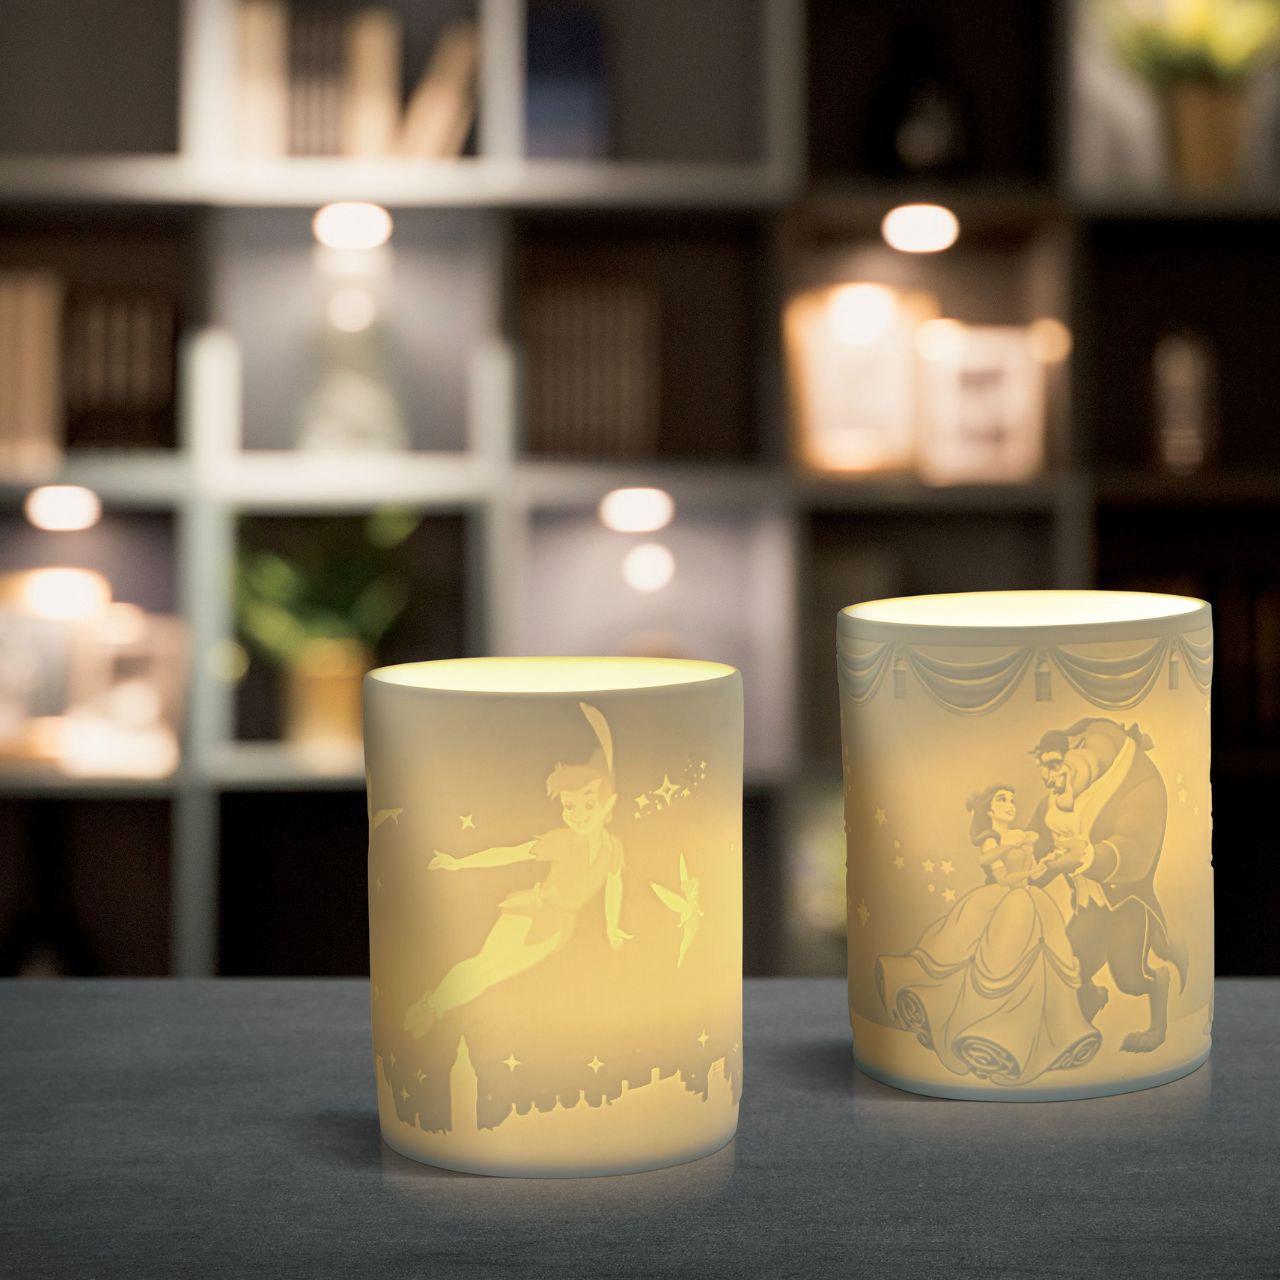 Disney Beauty Within Beauty and The Beast Tea Light Holder  Watch as Beauty and The Beast flicker around your room when you light the LED candle. The Belle and her Prince along with the enchanted rose are etched into the thin translucent porcelain which will radiate a warm light when lit at night. Perfect Disney addition to any home décor.